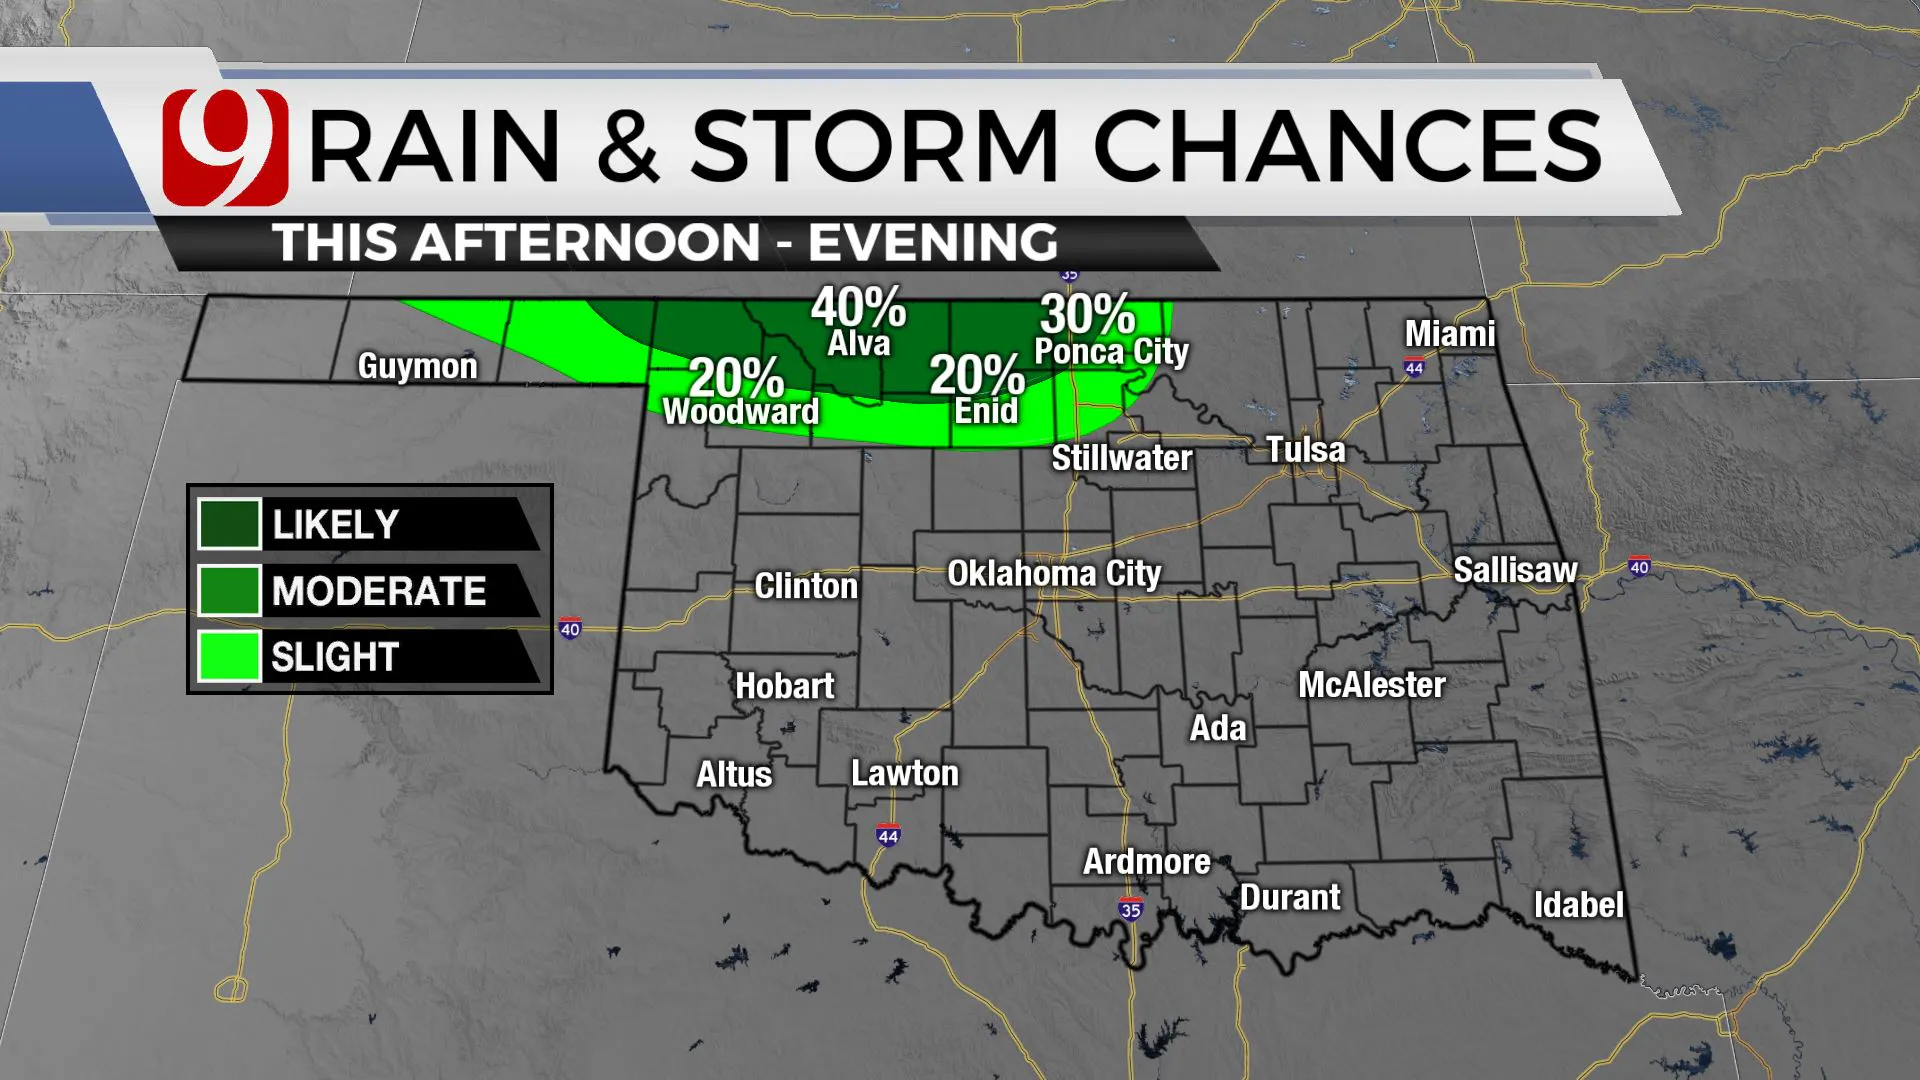 Rain and storm chances Monday afternoon.